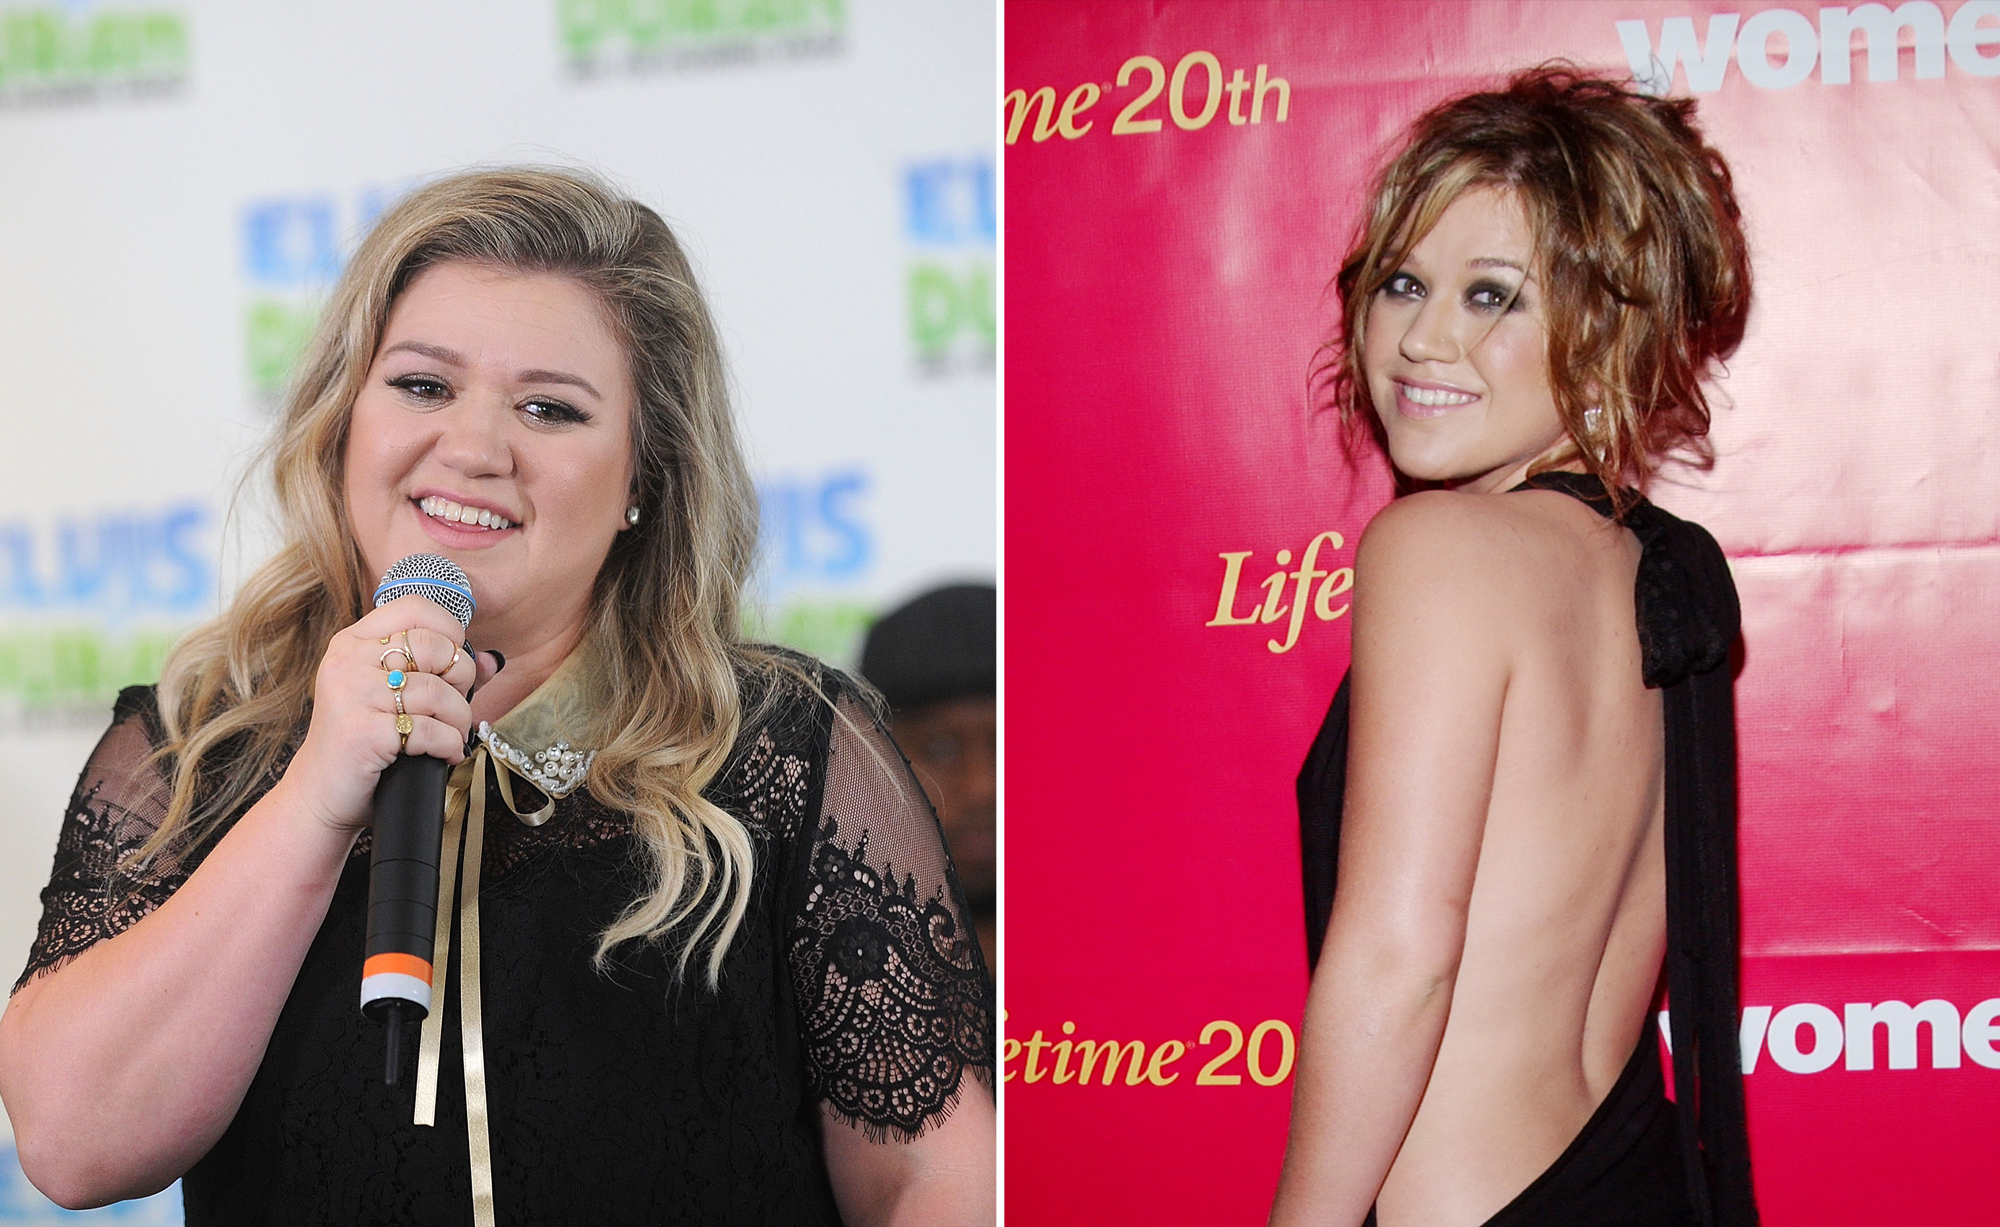 Kelly clarkson has been an artist in the constant struggle with your weight...